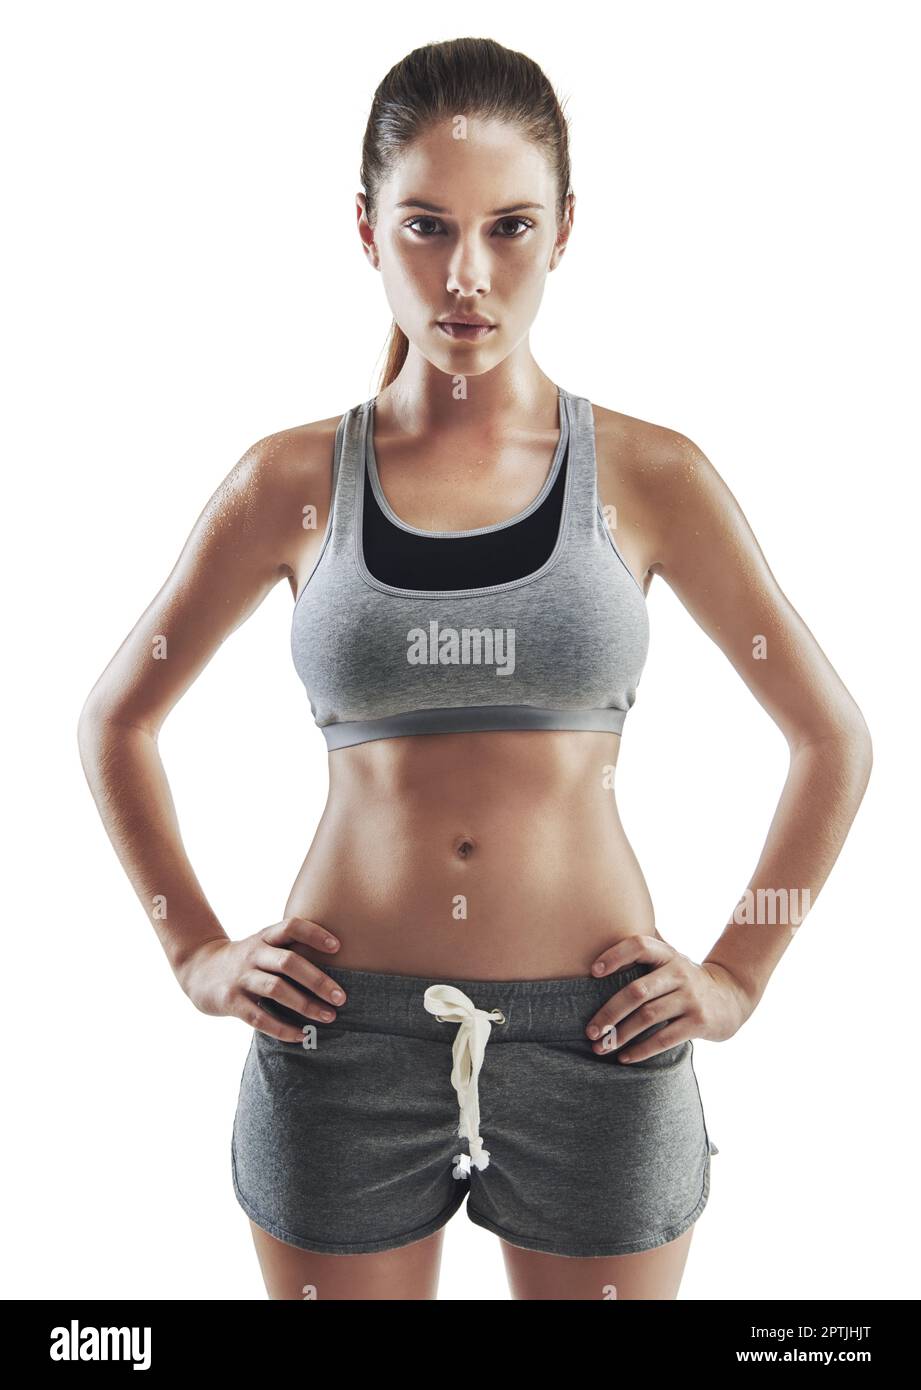 Ill reach my fitness goals. Cropped portrait of a young female athlete  standing arms akimbo against white background Stock Photo - Alamy